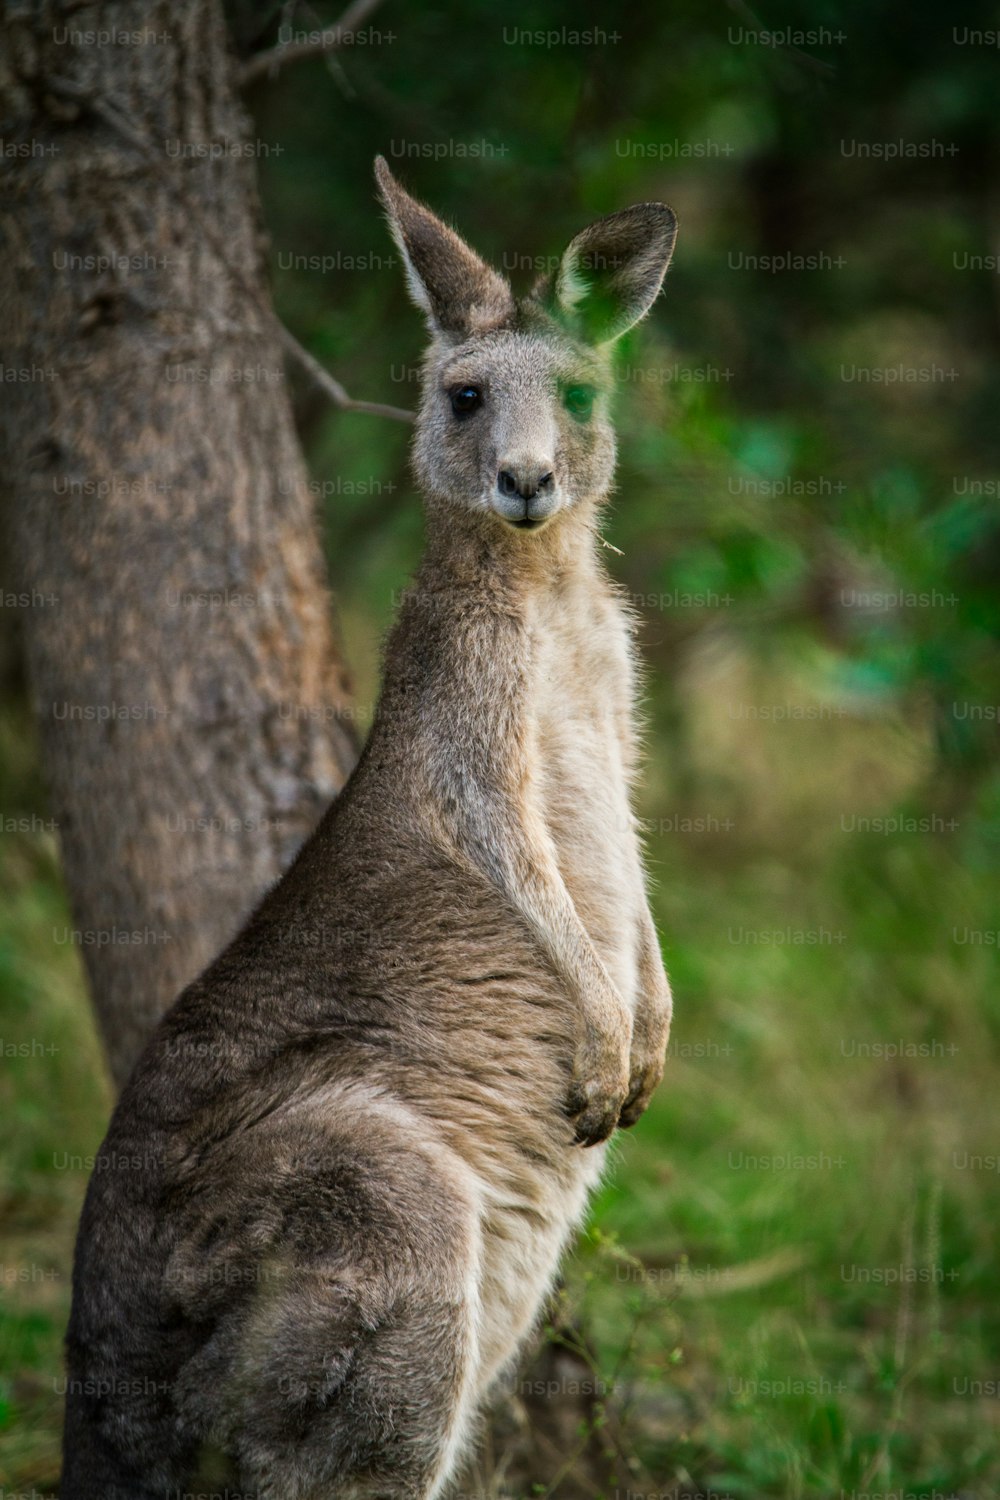 a kangaroo standing next to a tree in a forest